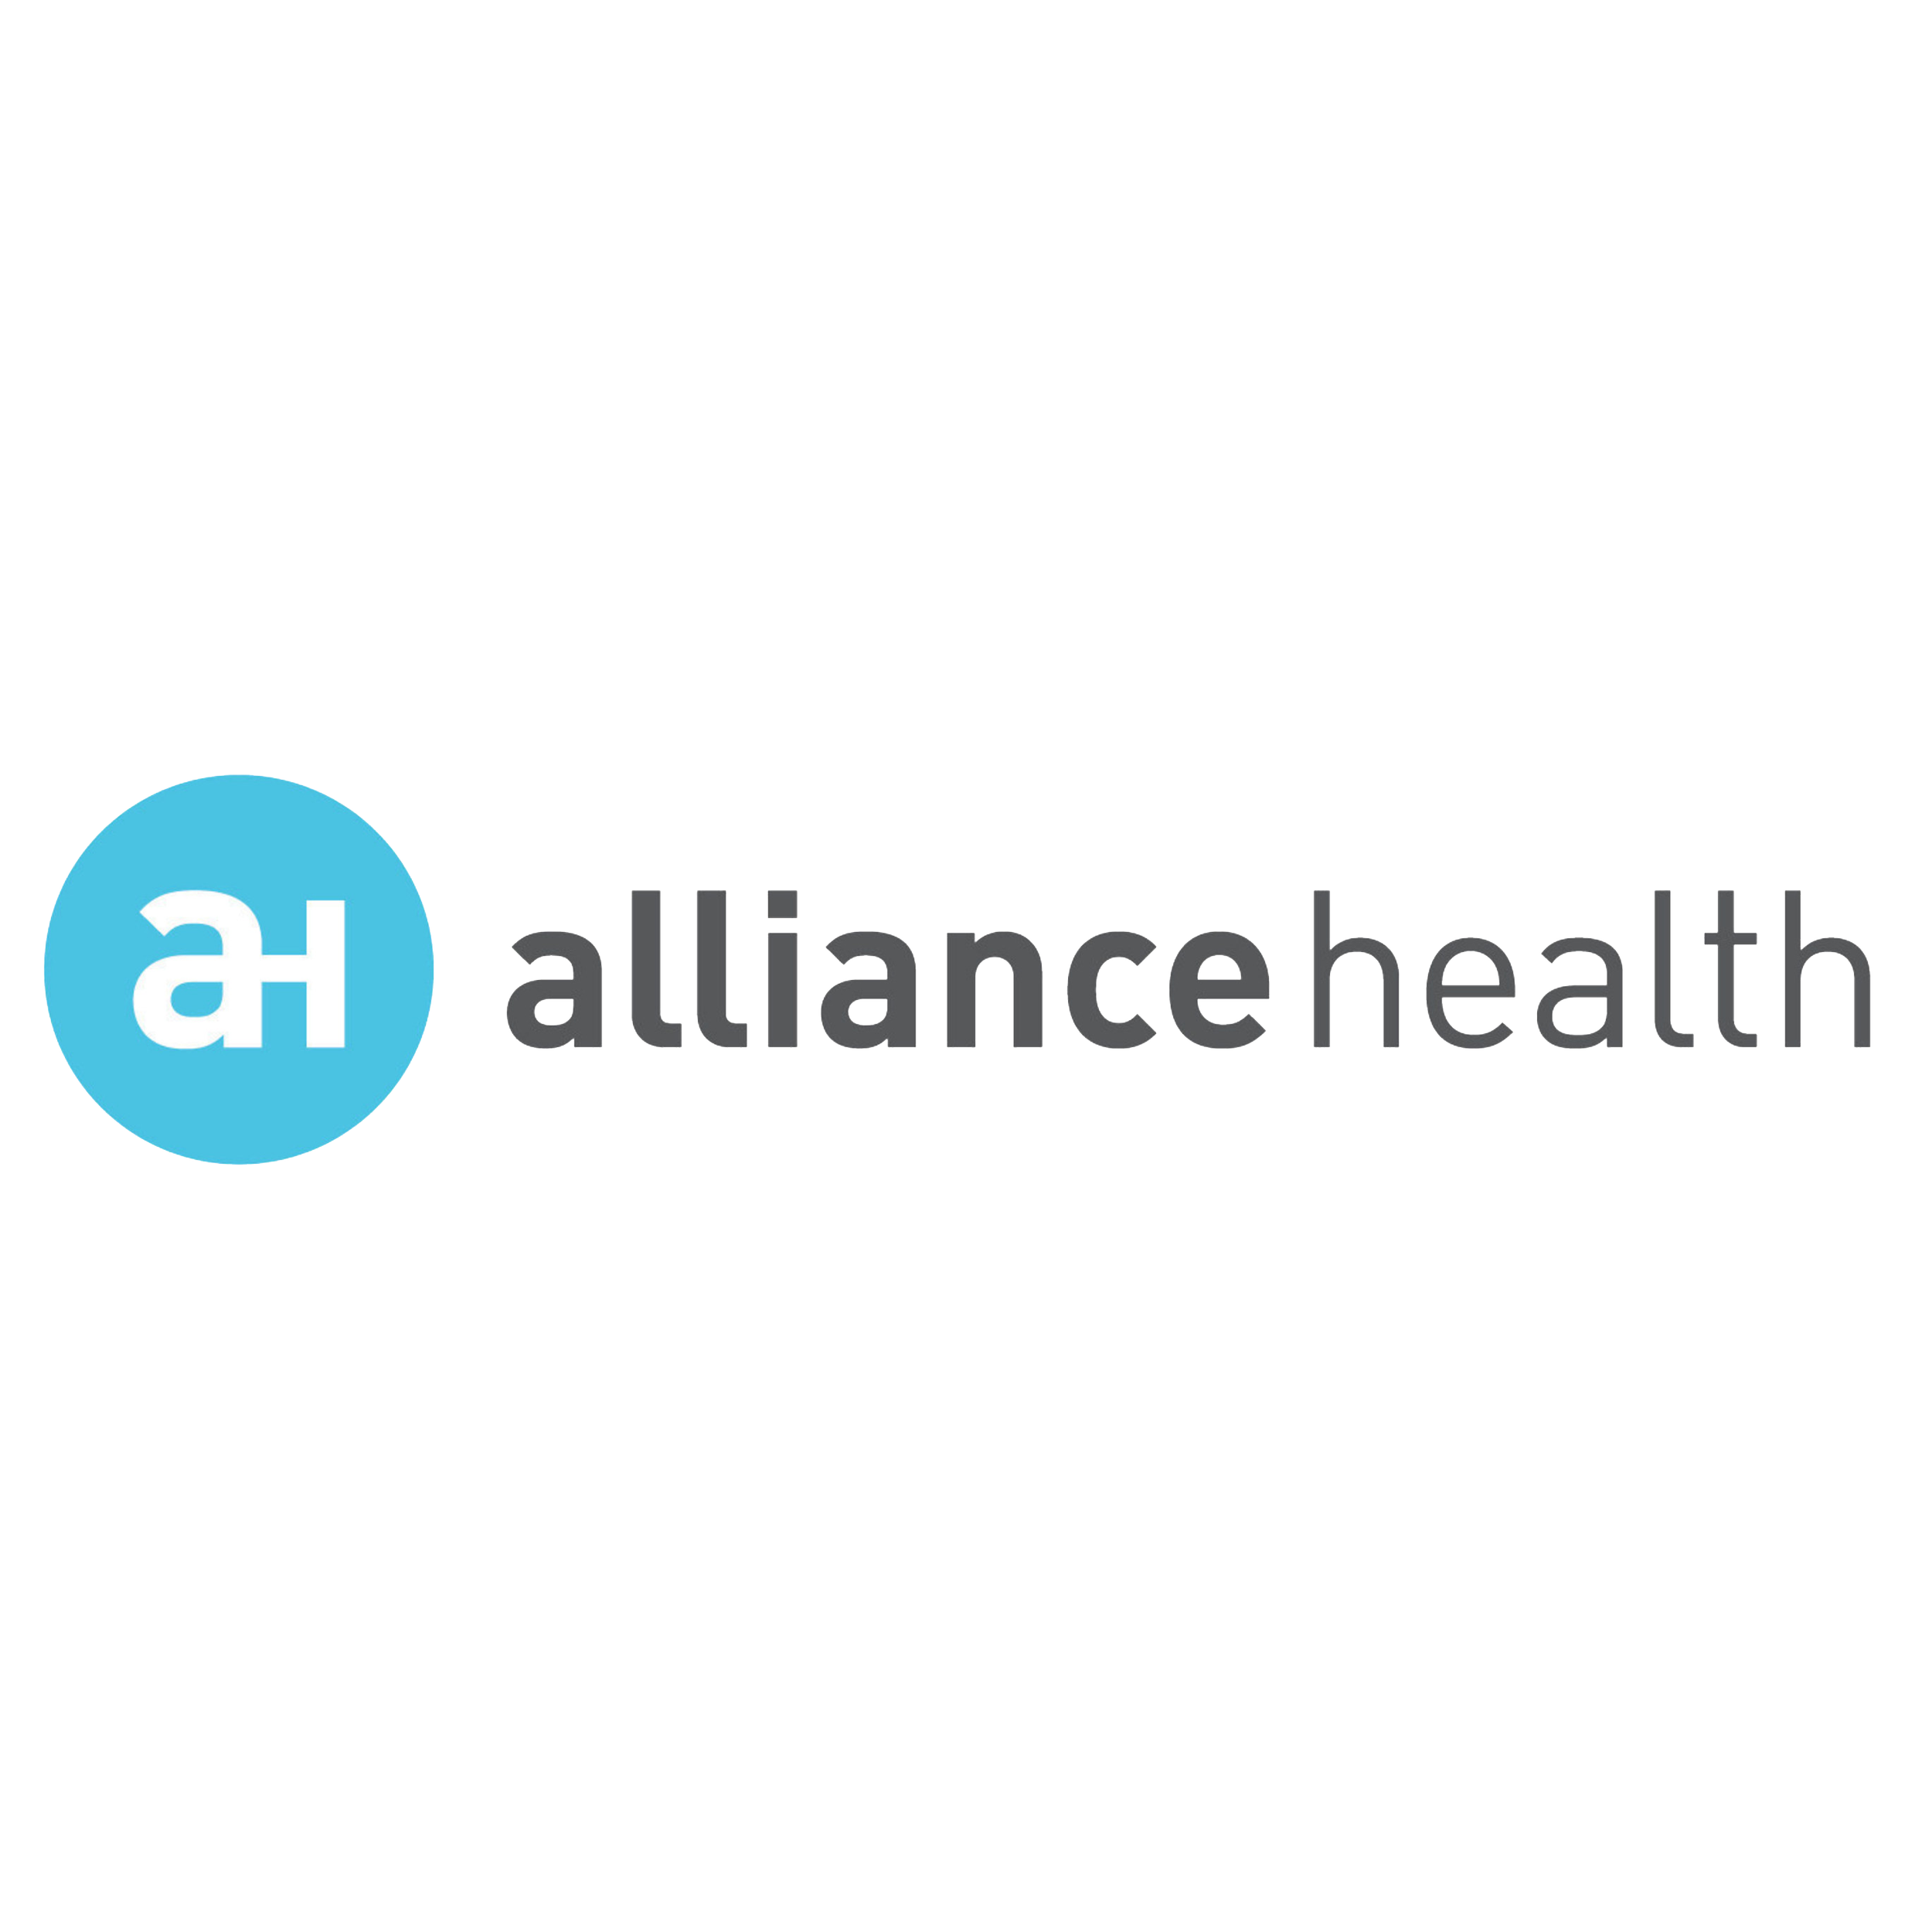 alliance health_square.png